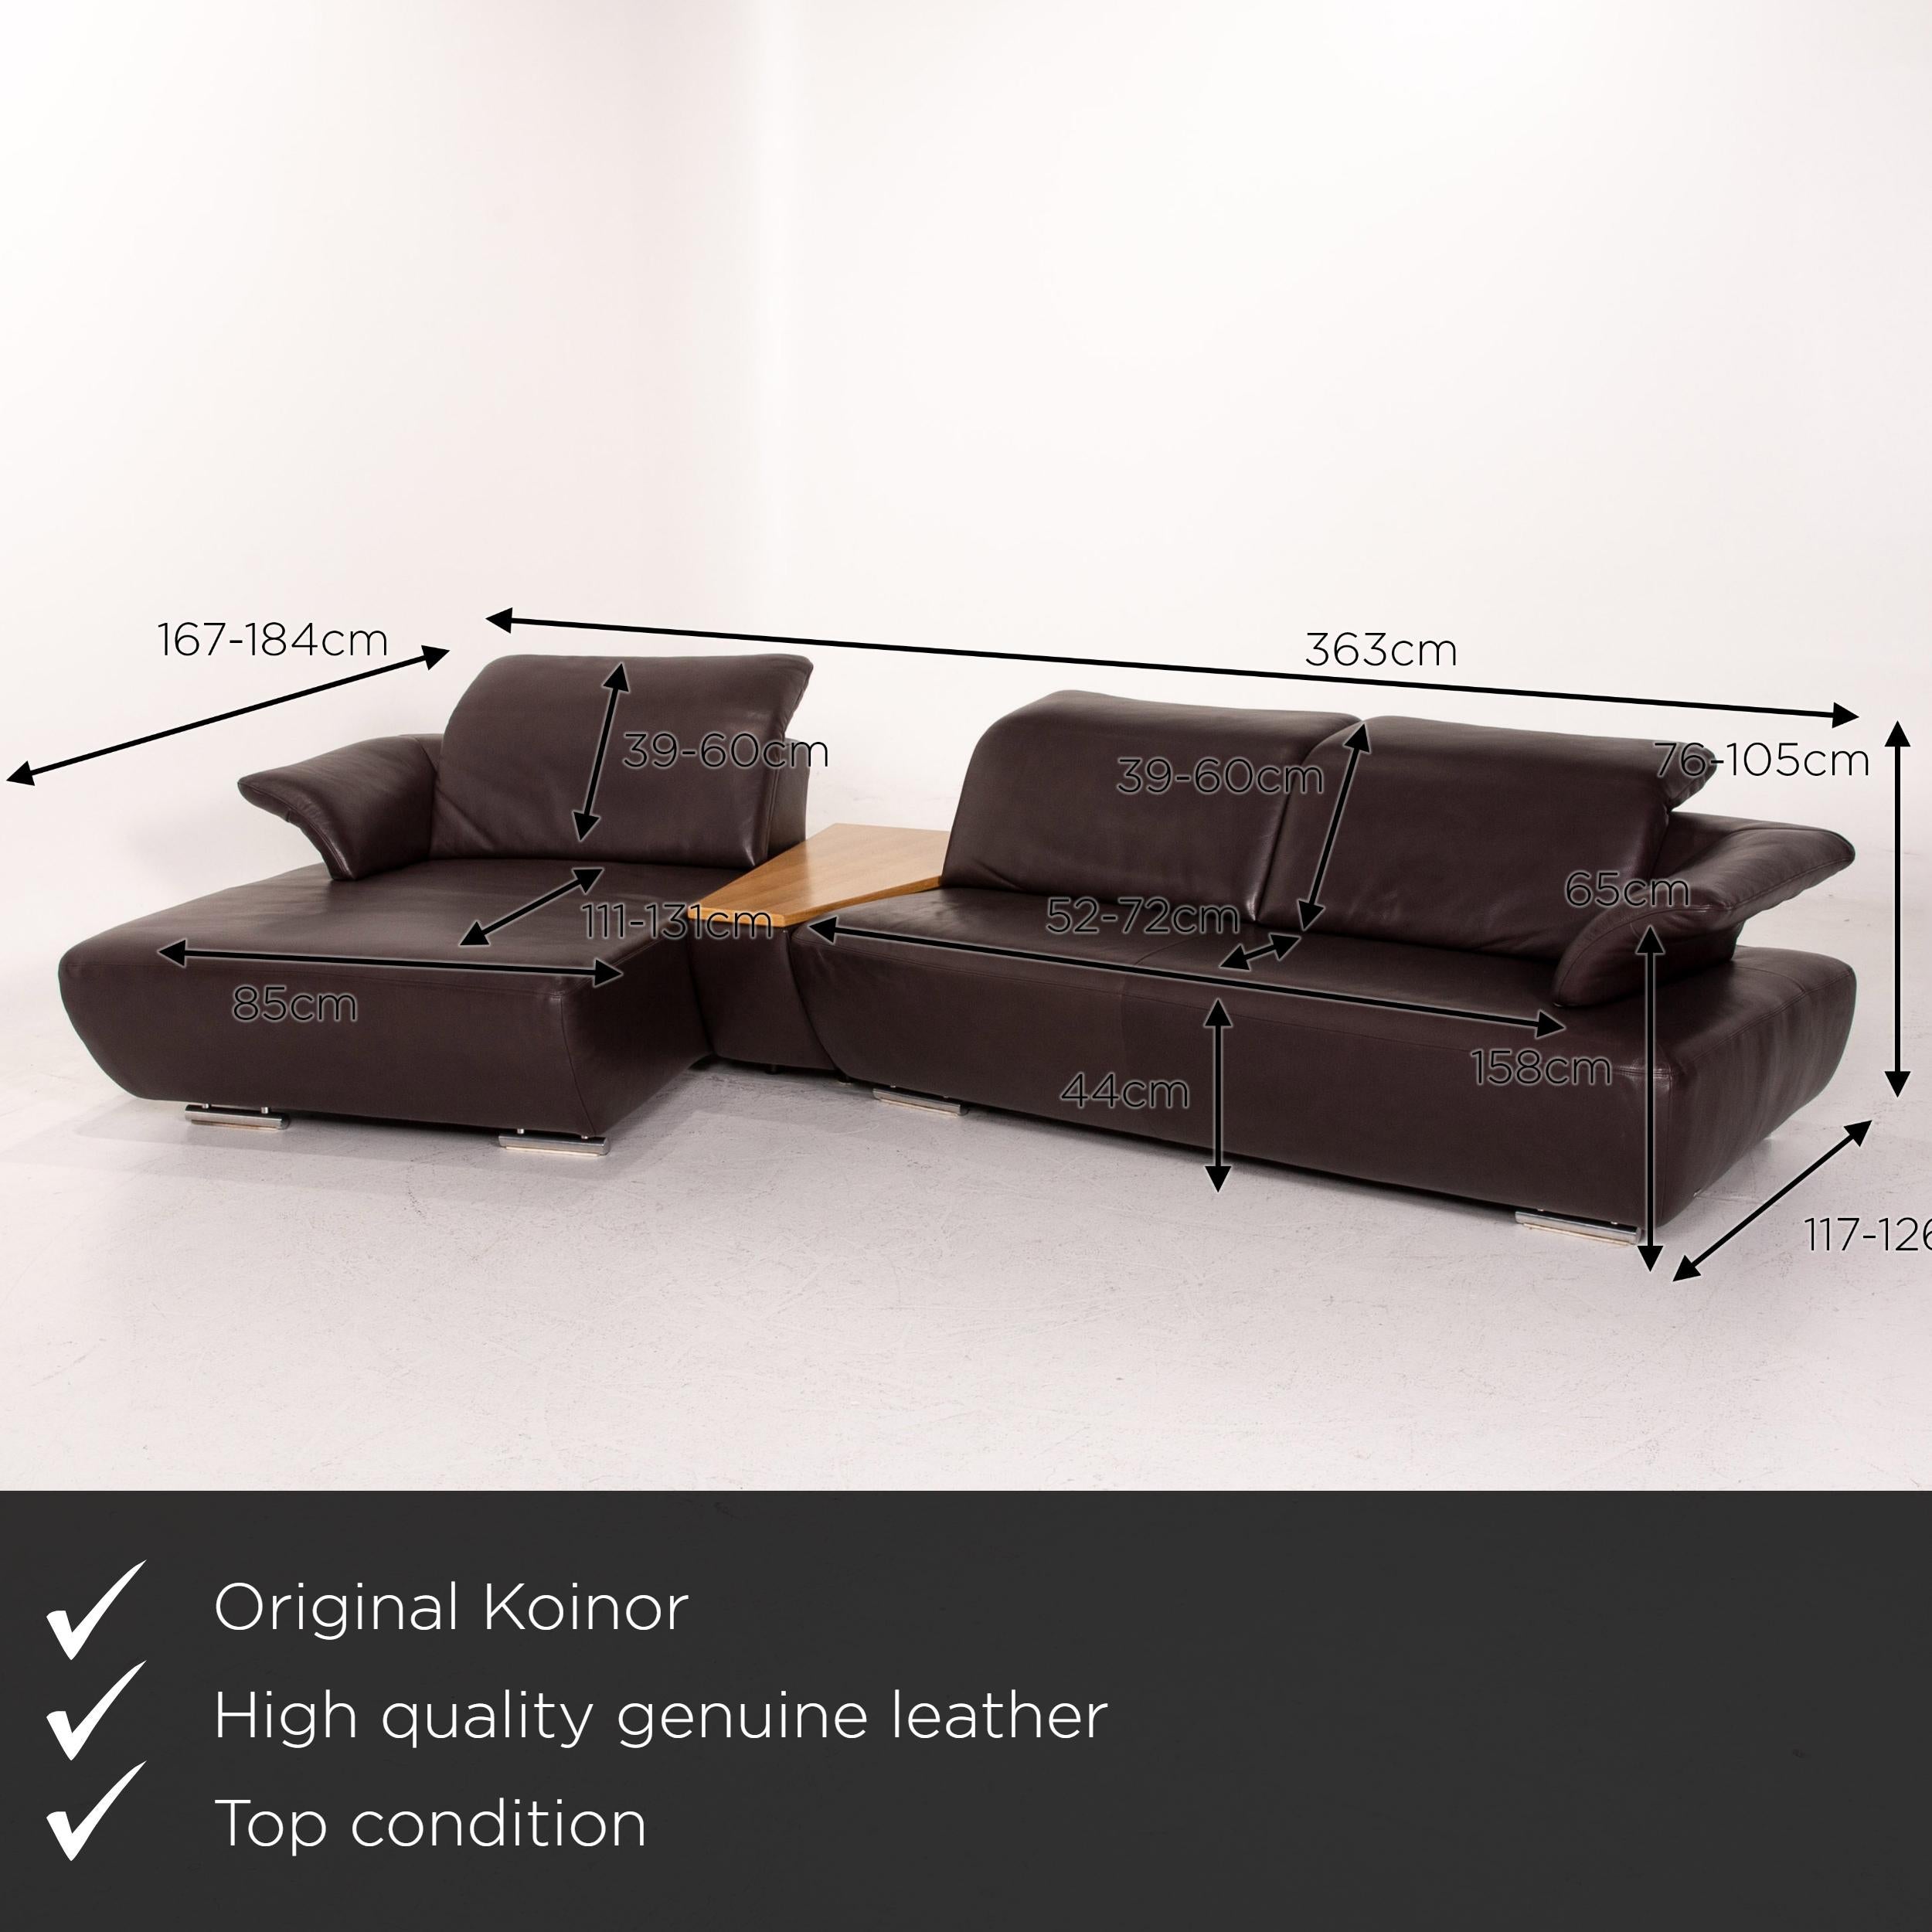 We present to you a Koinor Avanti leather corner sofa brown dark brown wood function sofa couch.
   
 

 Product measurements in centimeters:
 

Depth 167
Width 184
Height 76
Seat height 44
Rest height 65
Seat depth 111
Seat width